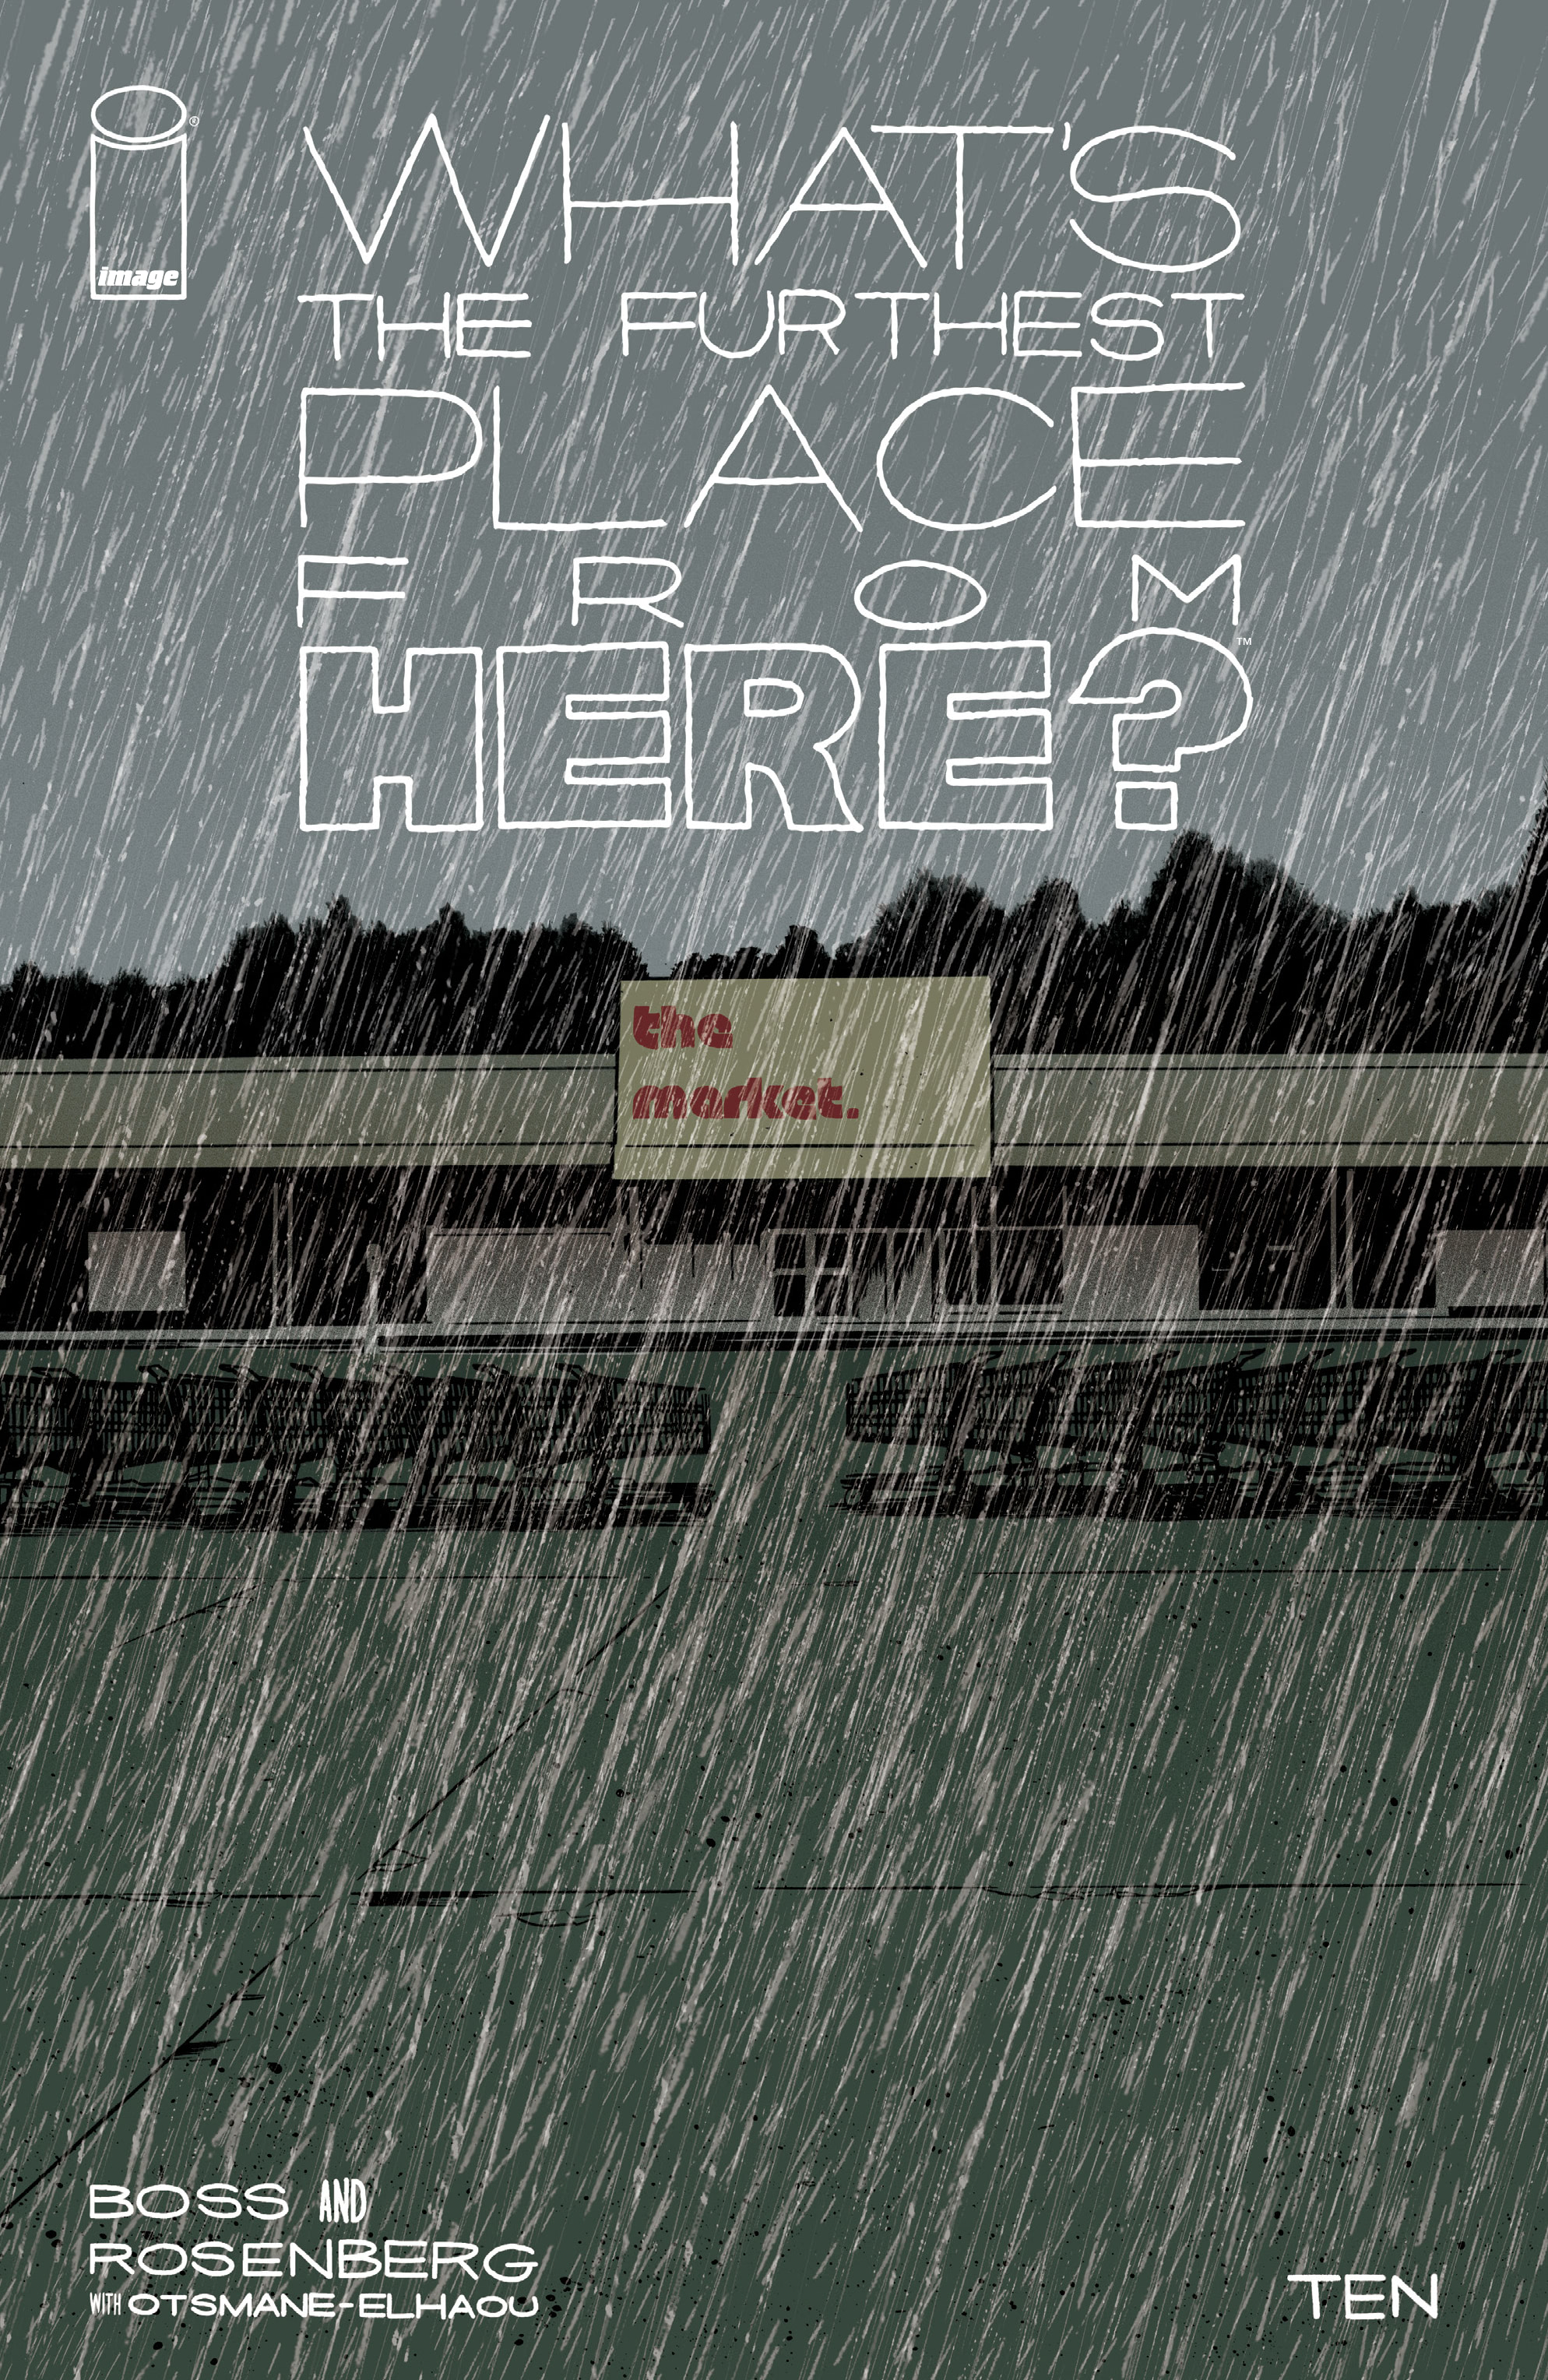 Read online What's The Furthest Place From Here? comic -  Issue #10 - 1